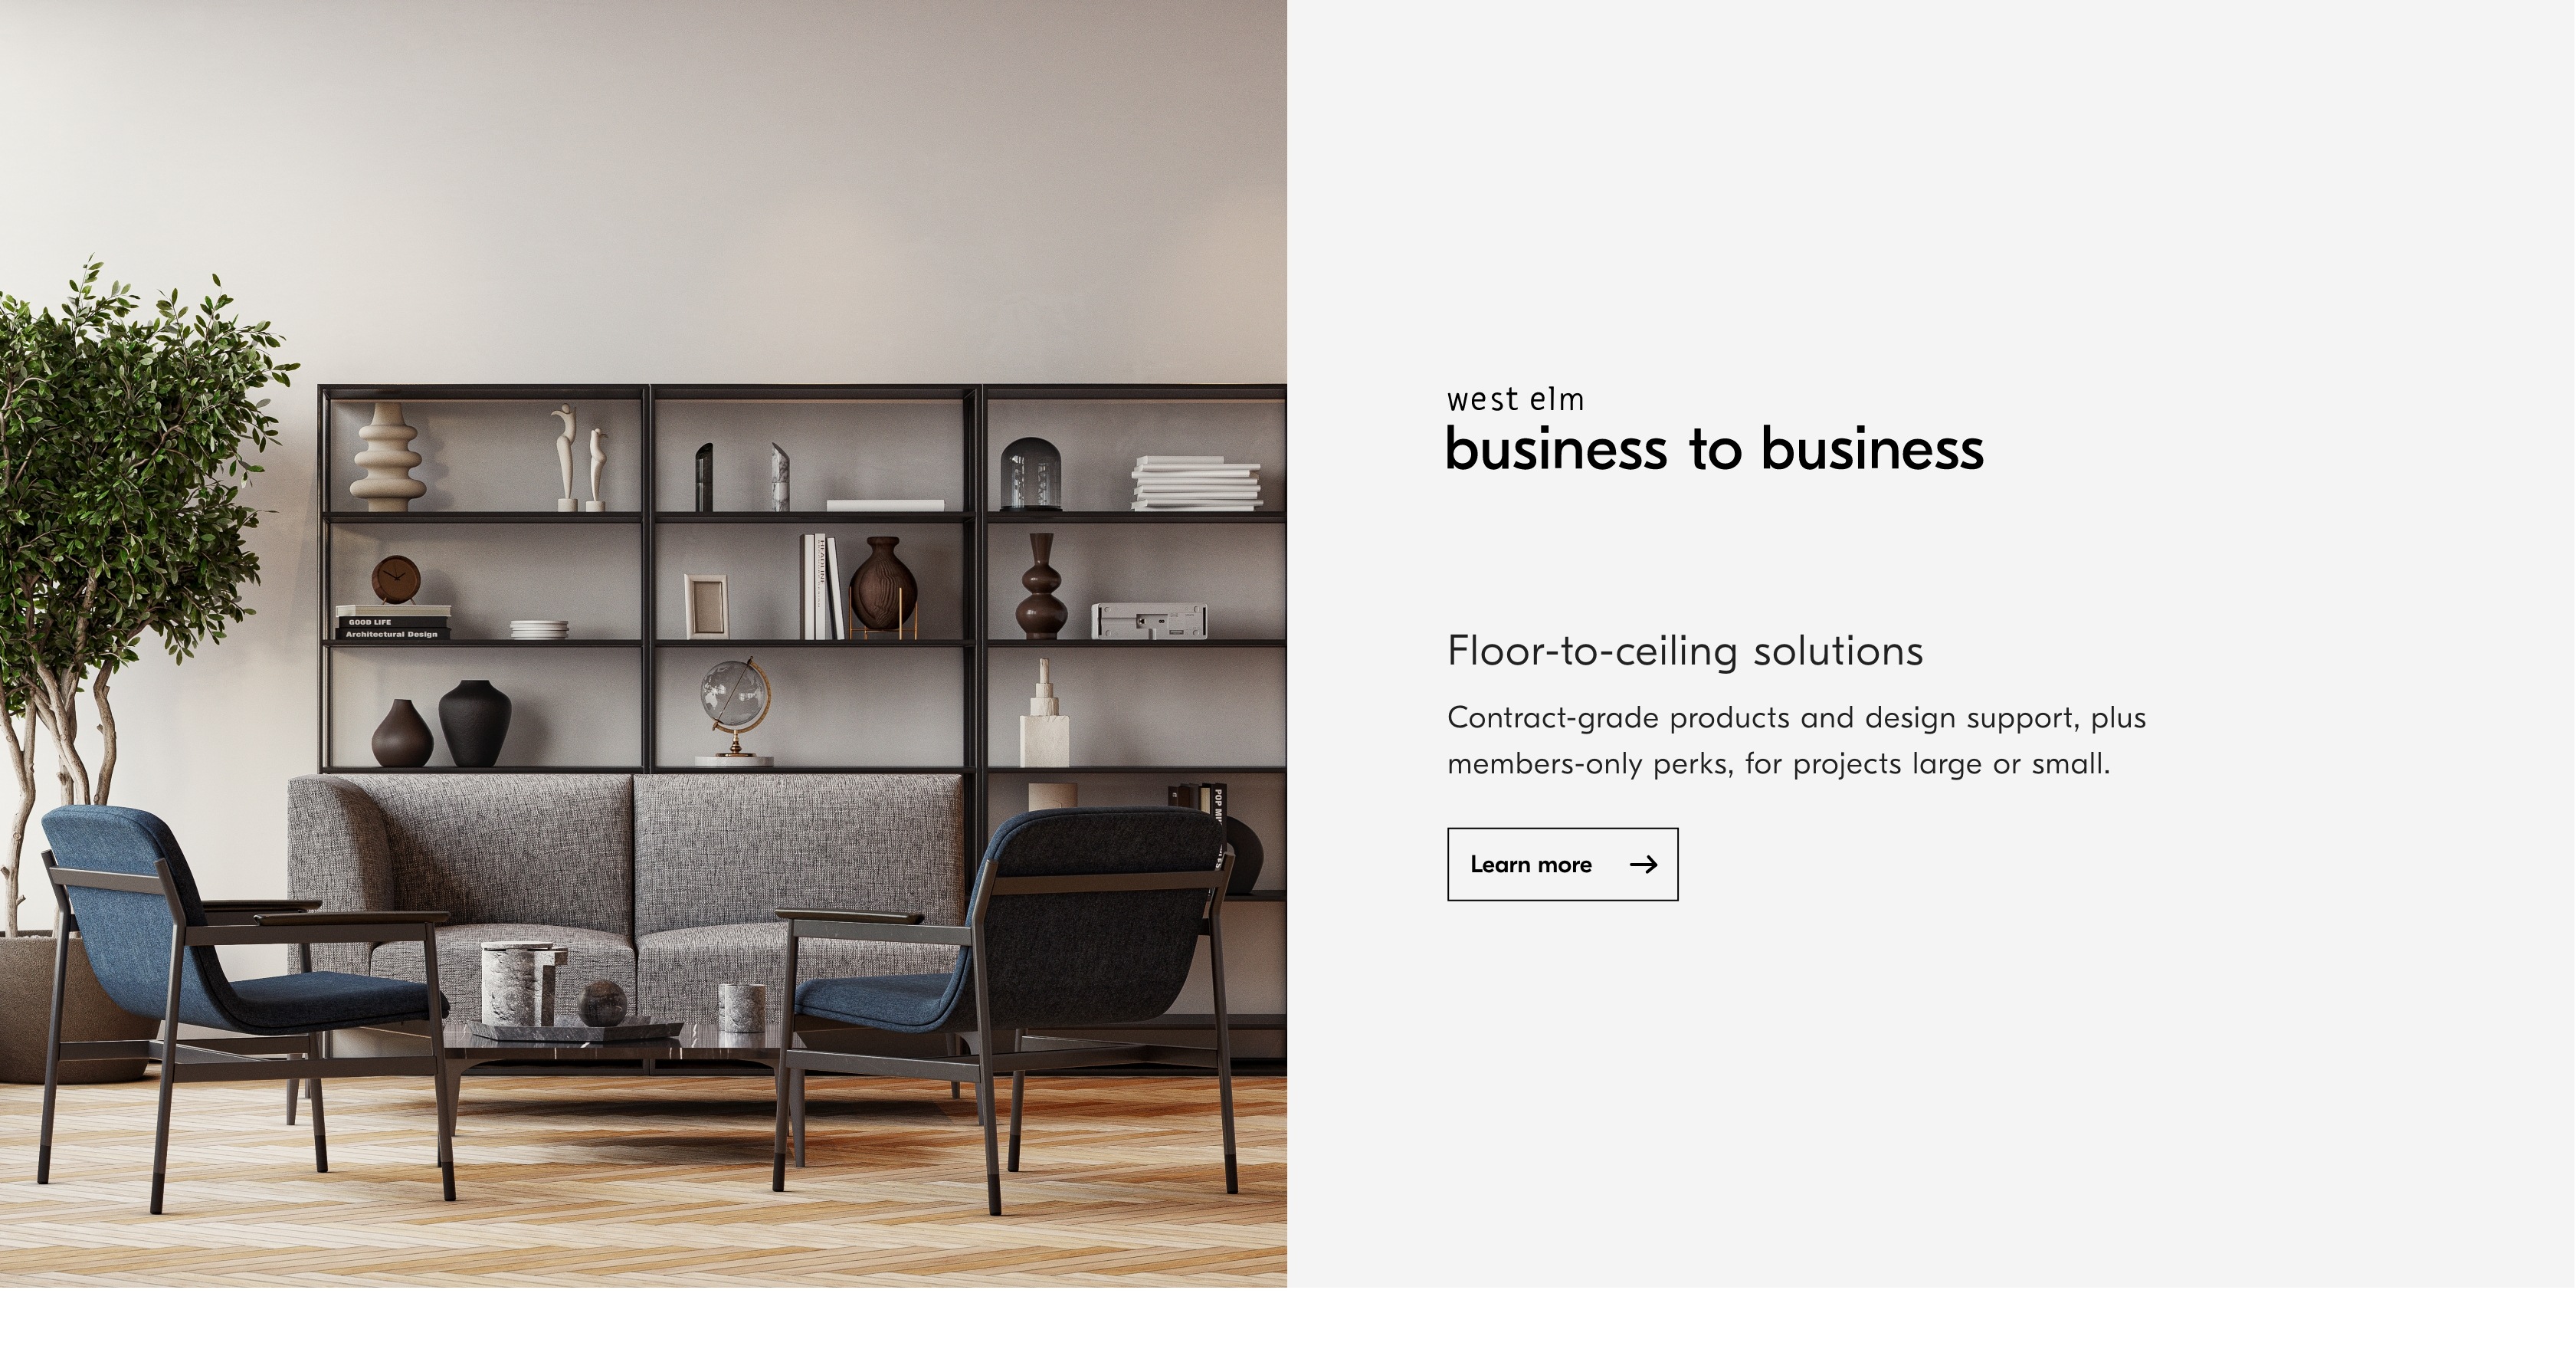 west elm business to business